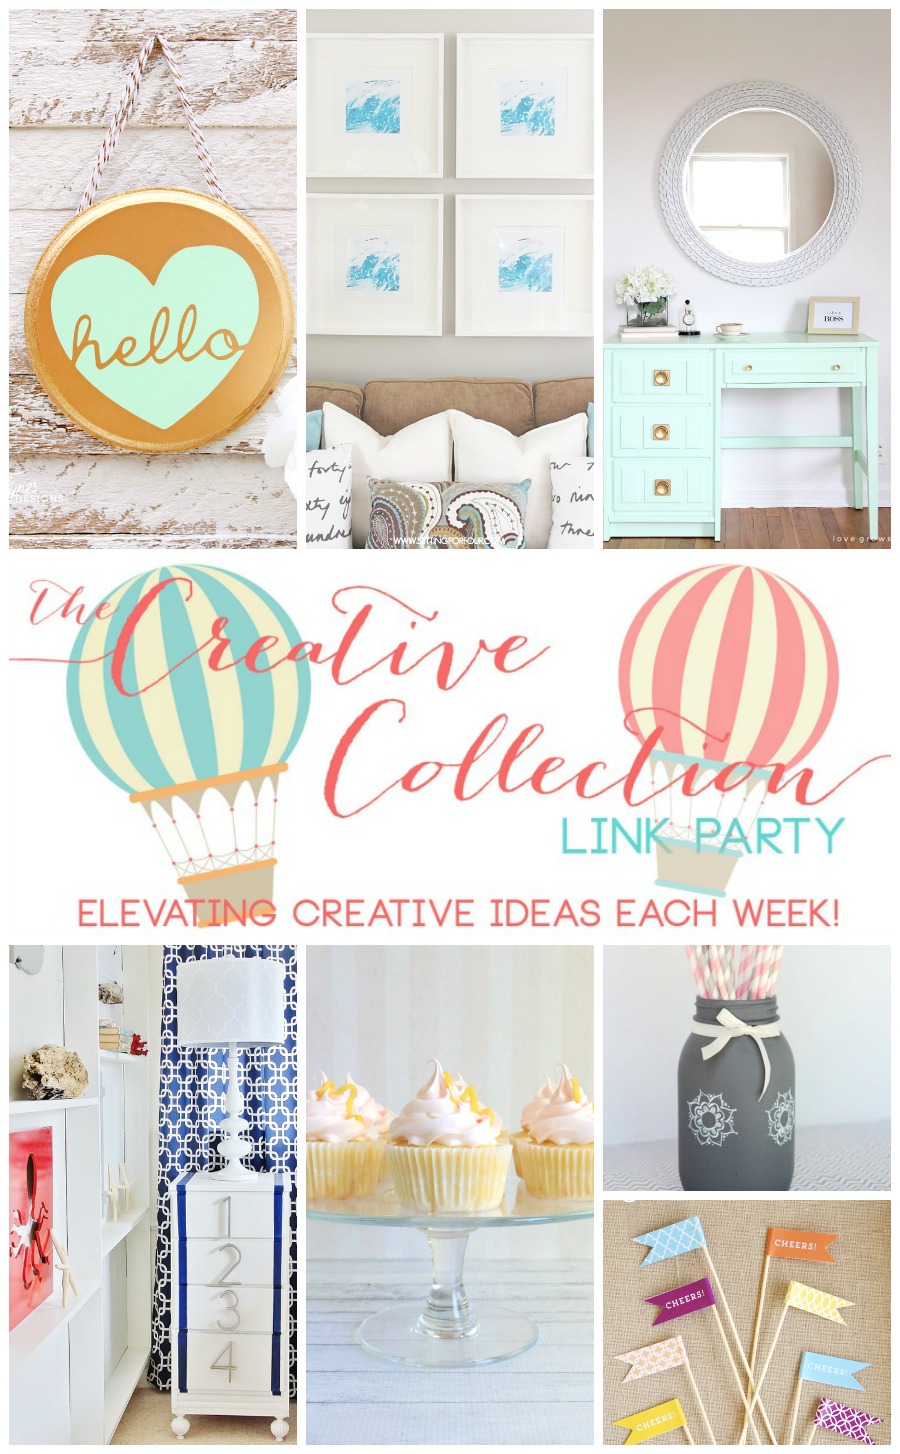 The Creative Collection Link Party